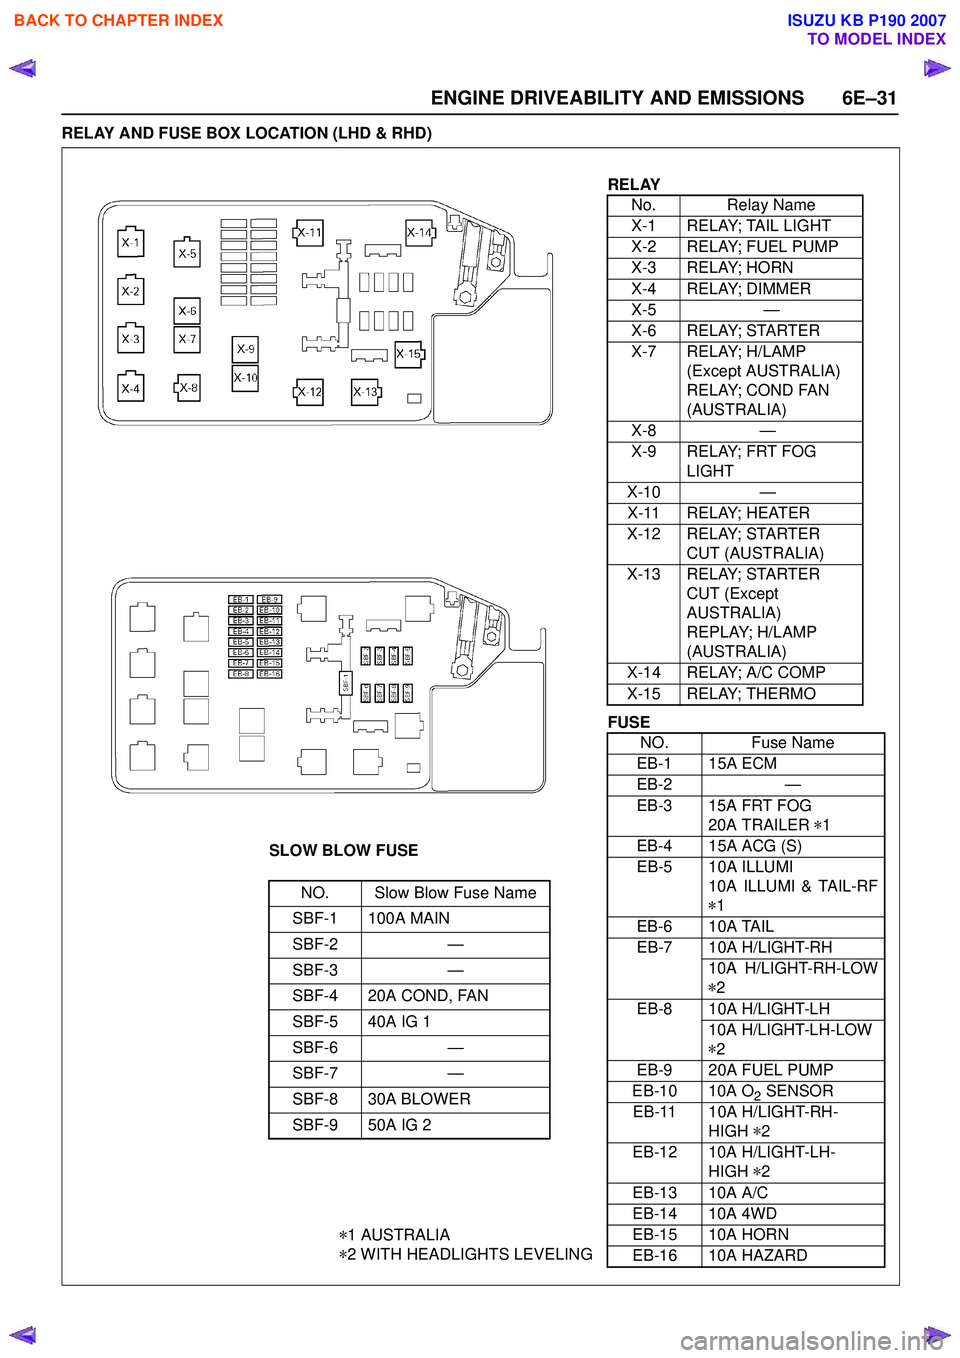 ISUZU KB P190 2007  Workshop Repair Manual ENGINE DRIVEABILITY AND EMISSIONS 6E–31
RELAY AND FUSE BOX LOCATION (LHD & RHD)
RELAYNo. Relay Name 
X-1 RELAY; TAIL LIGHT 
X-2 RELAY; FUEL PUMP
X-3 RELAY; HORN 
X-4 RELAY; DIMMER 
X-5 —
X-6 RELAY